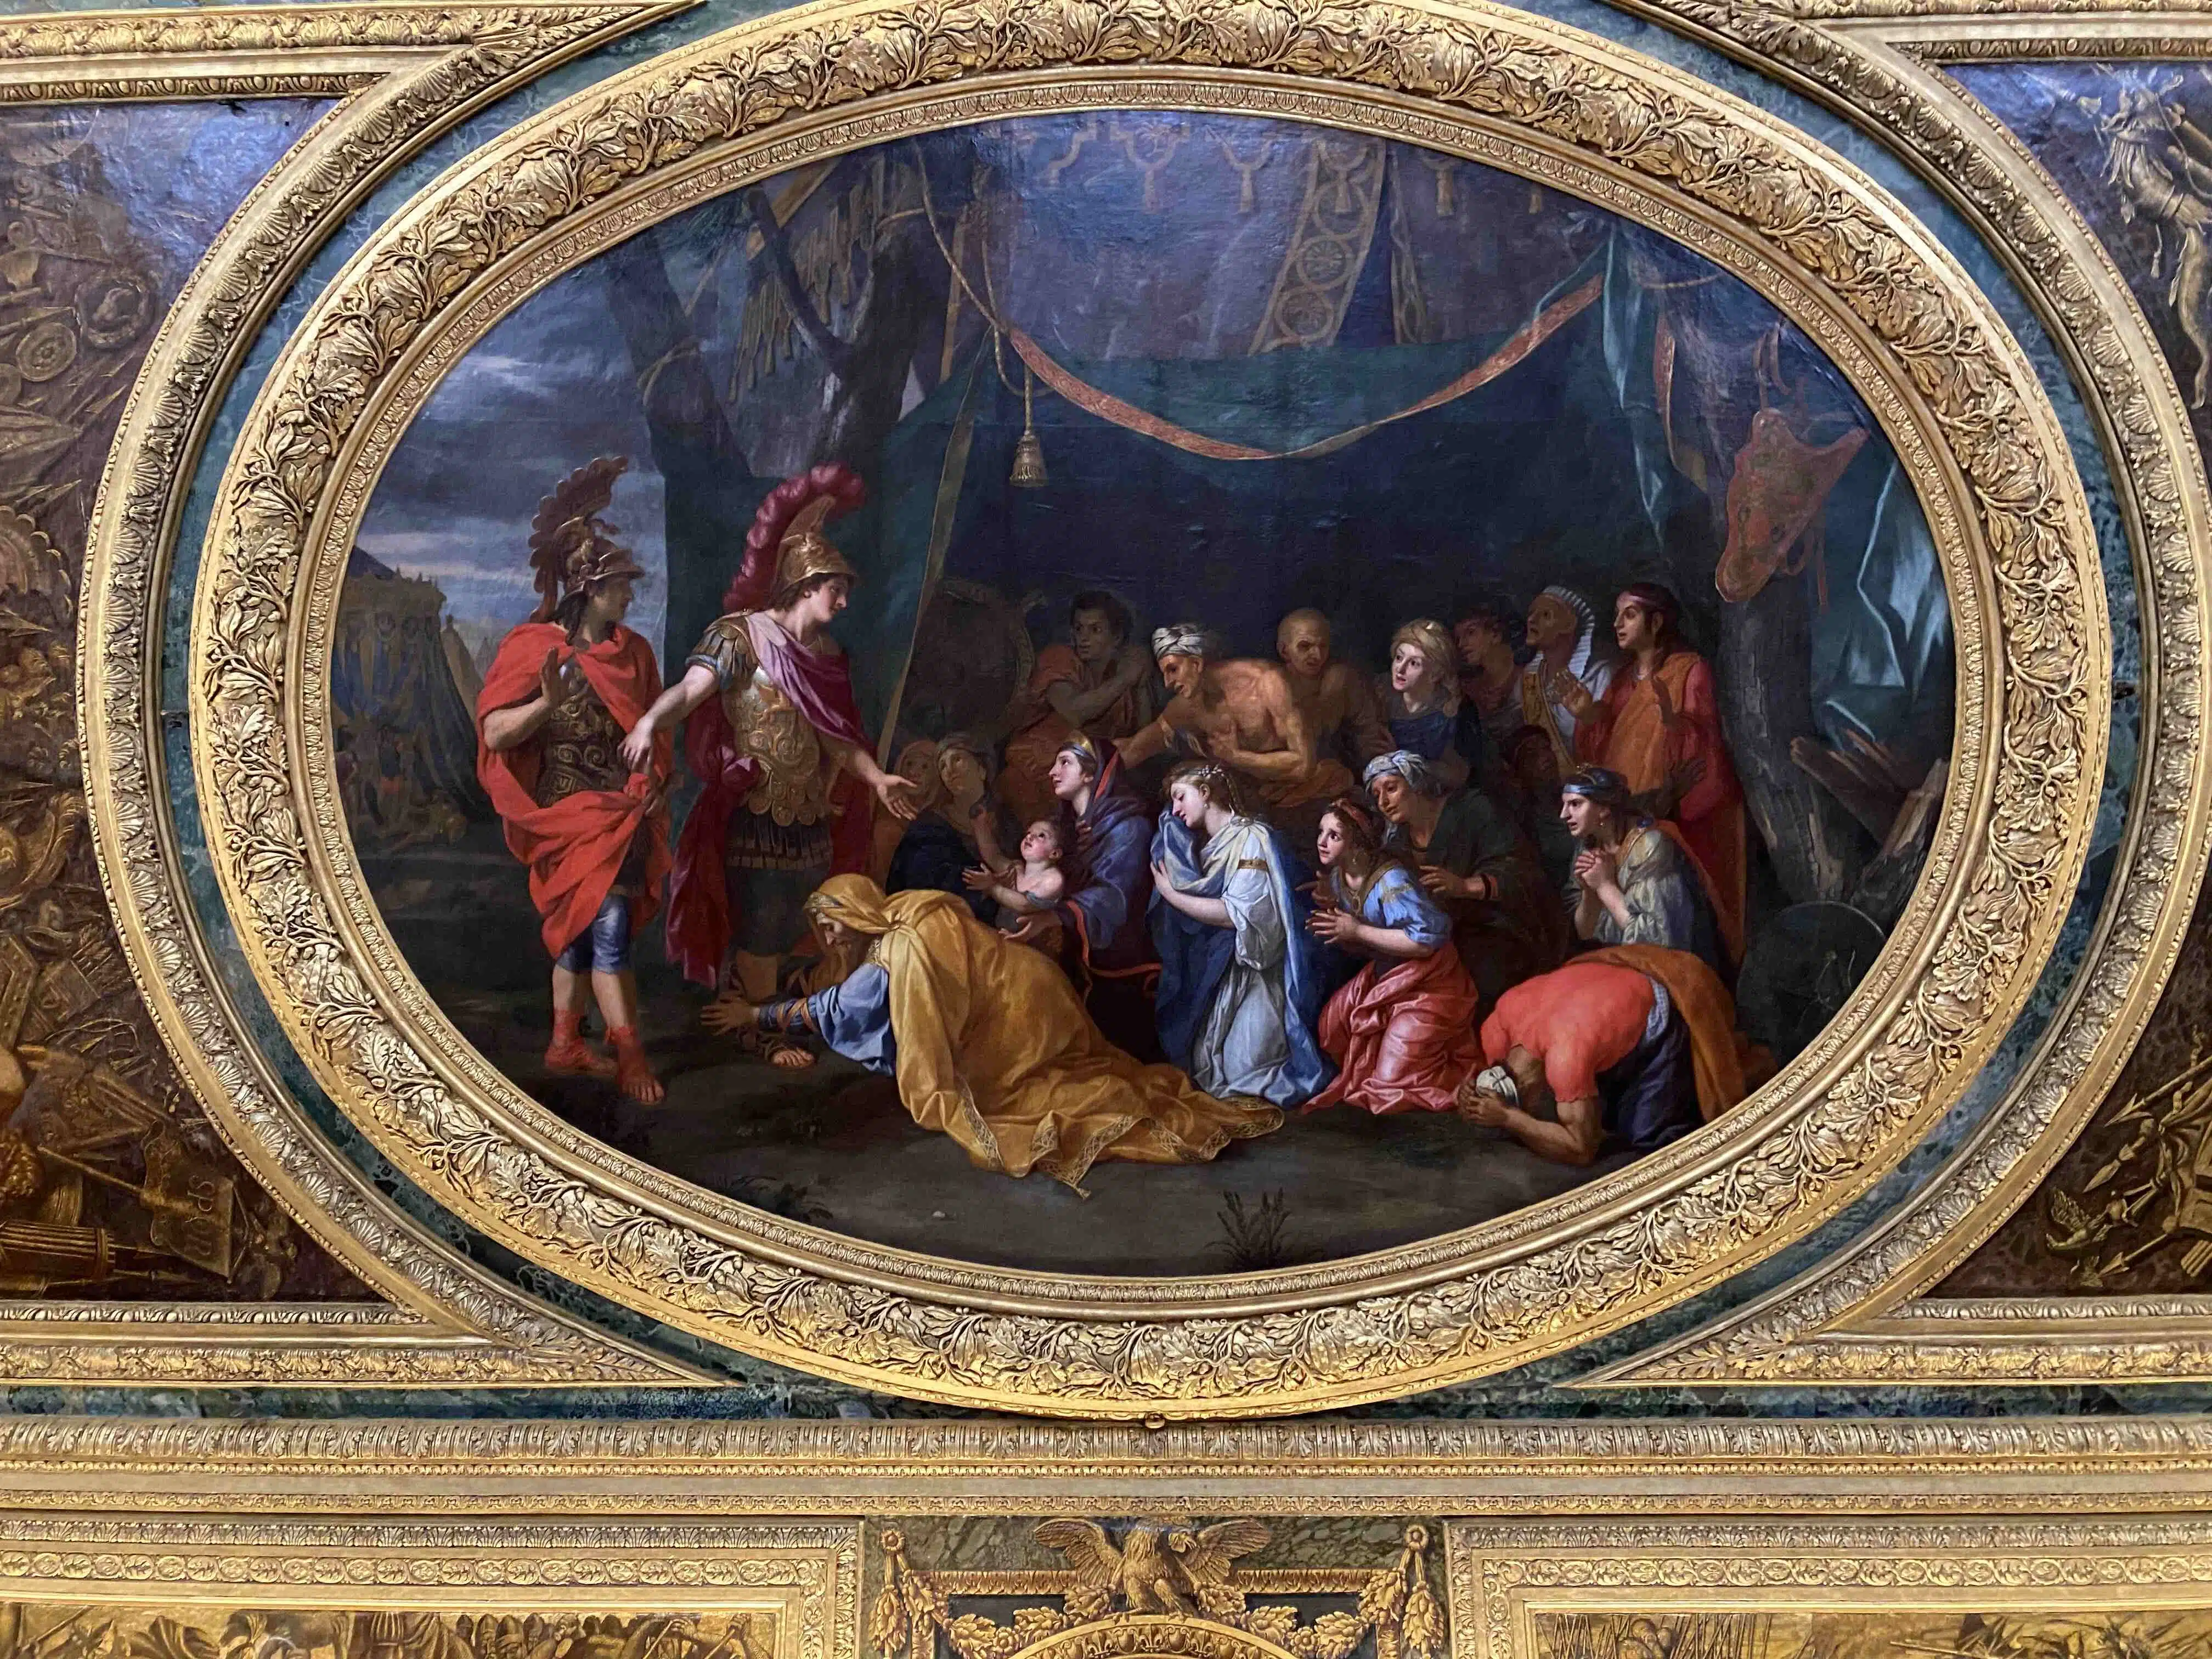 The Family of Darius before Alexander the Great (or The Tent of Darius) painting by Le Brun at palace of Versailles.